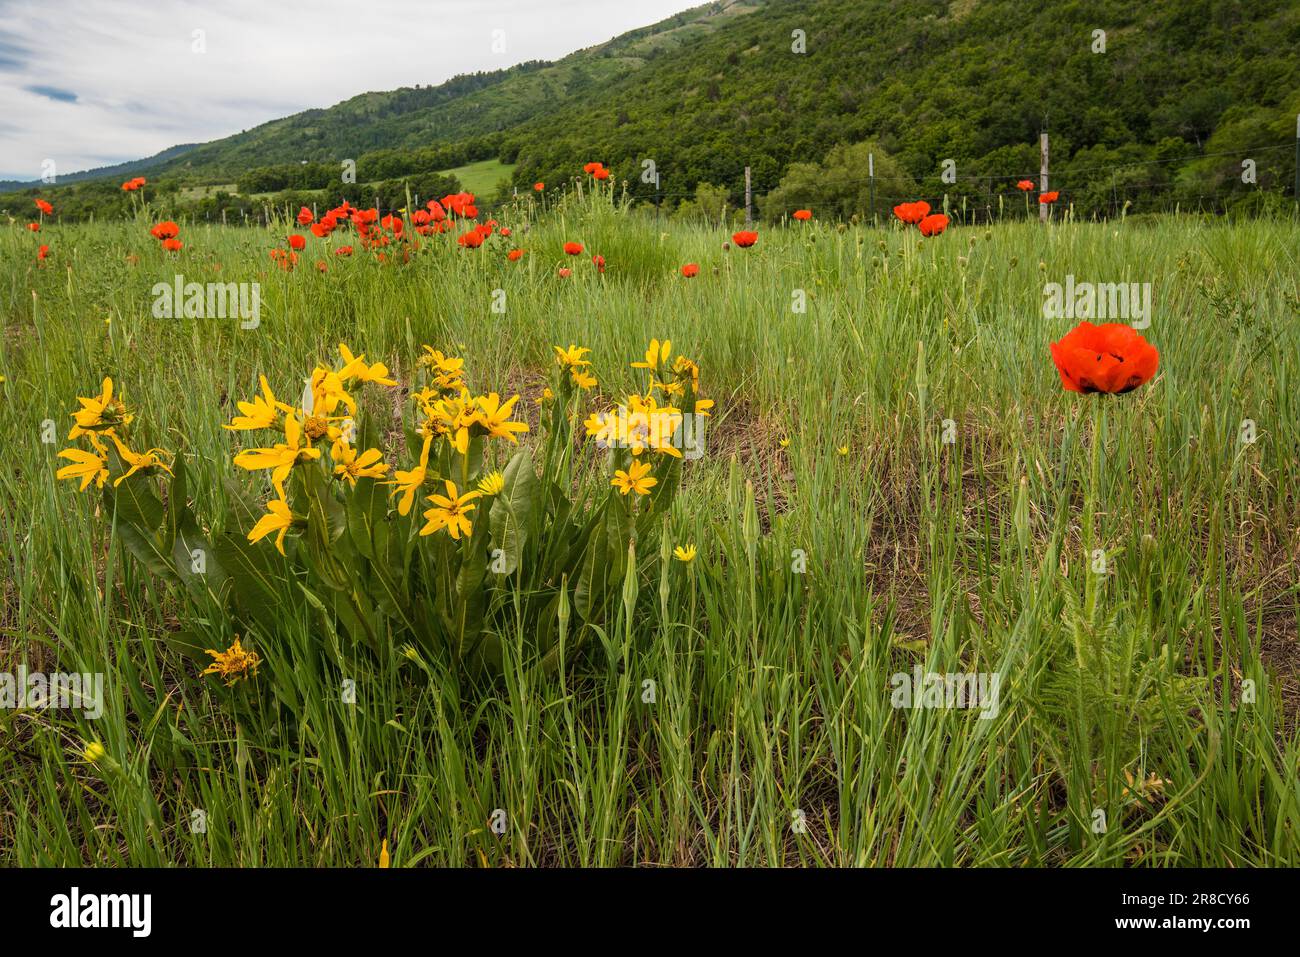 Wild poppies in a mountain meadow and fields of verdant green grasses. Stock Photo